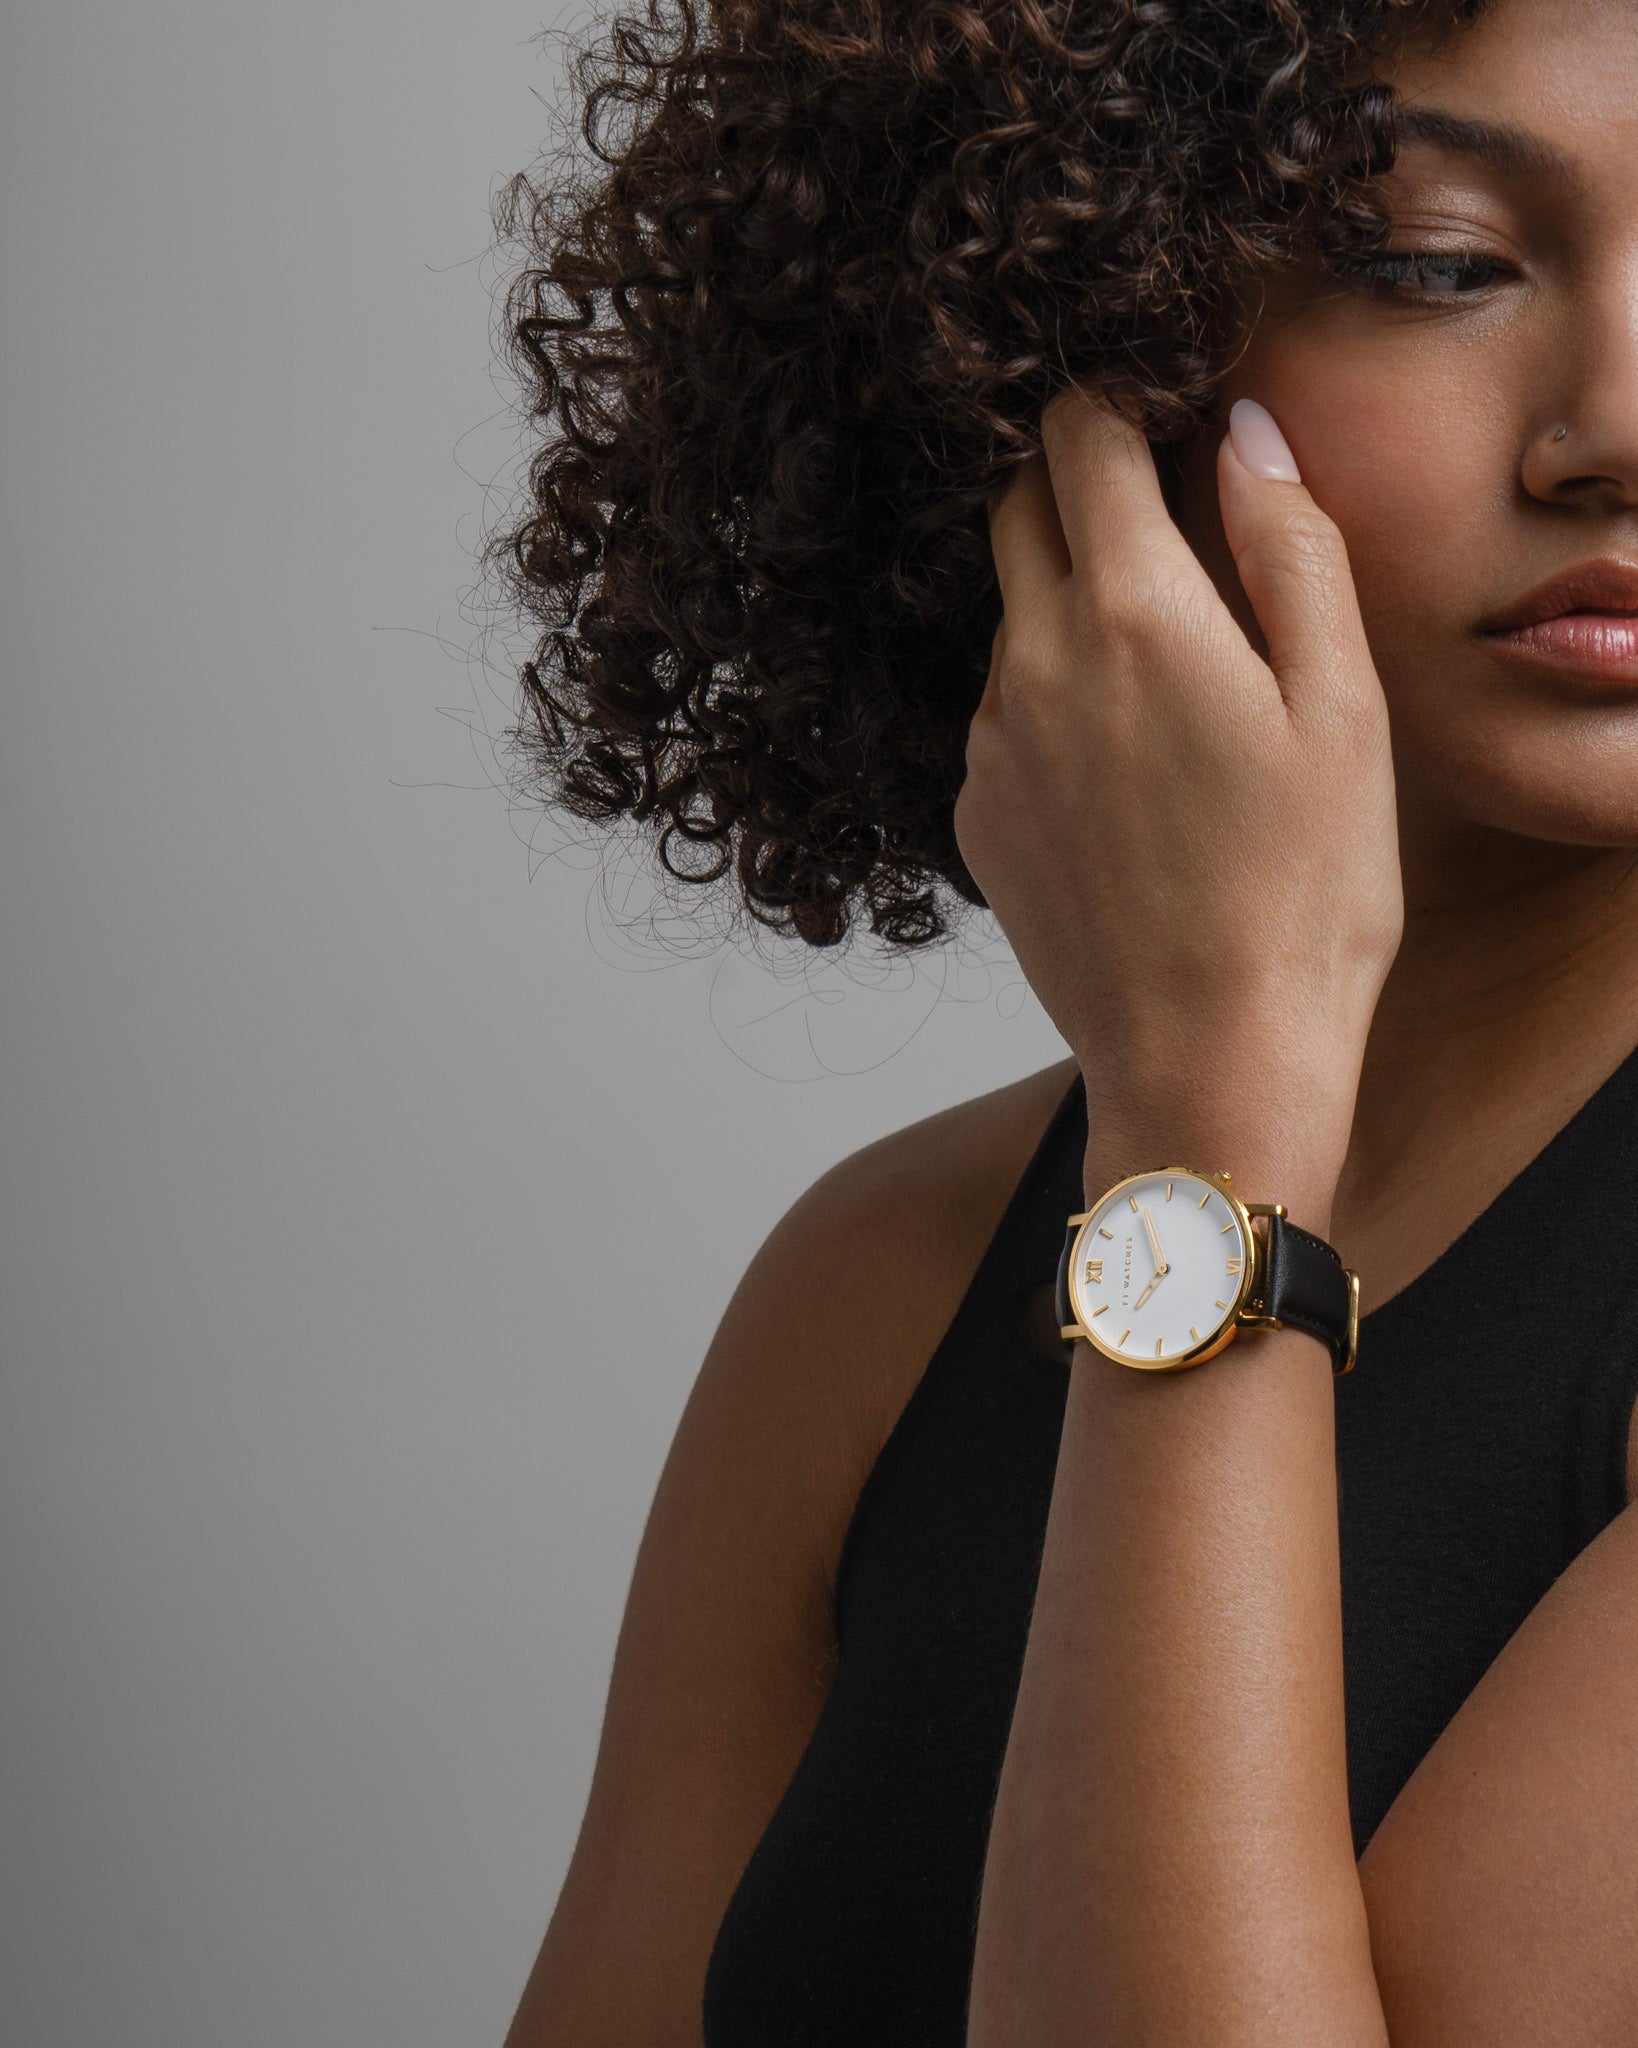 Discover Sunlight, a 36mm women's watch from Five Jwlry with a white and gold dial. This one can be paired with a wide variety of leather colors, such as black, white, tan and beige!